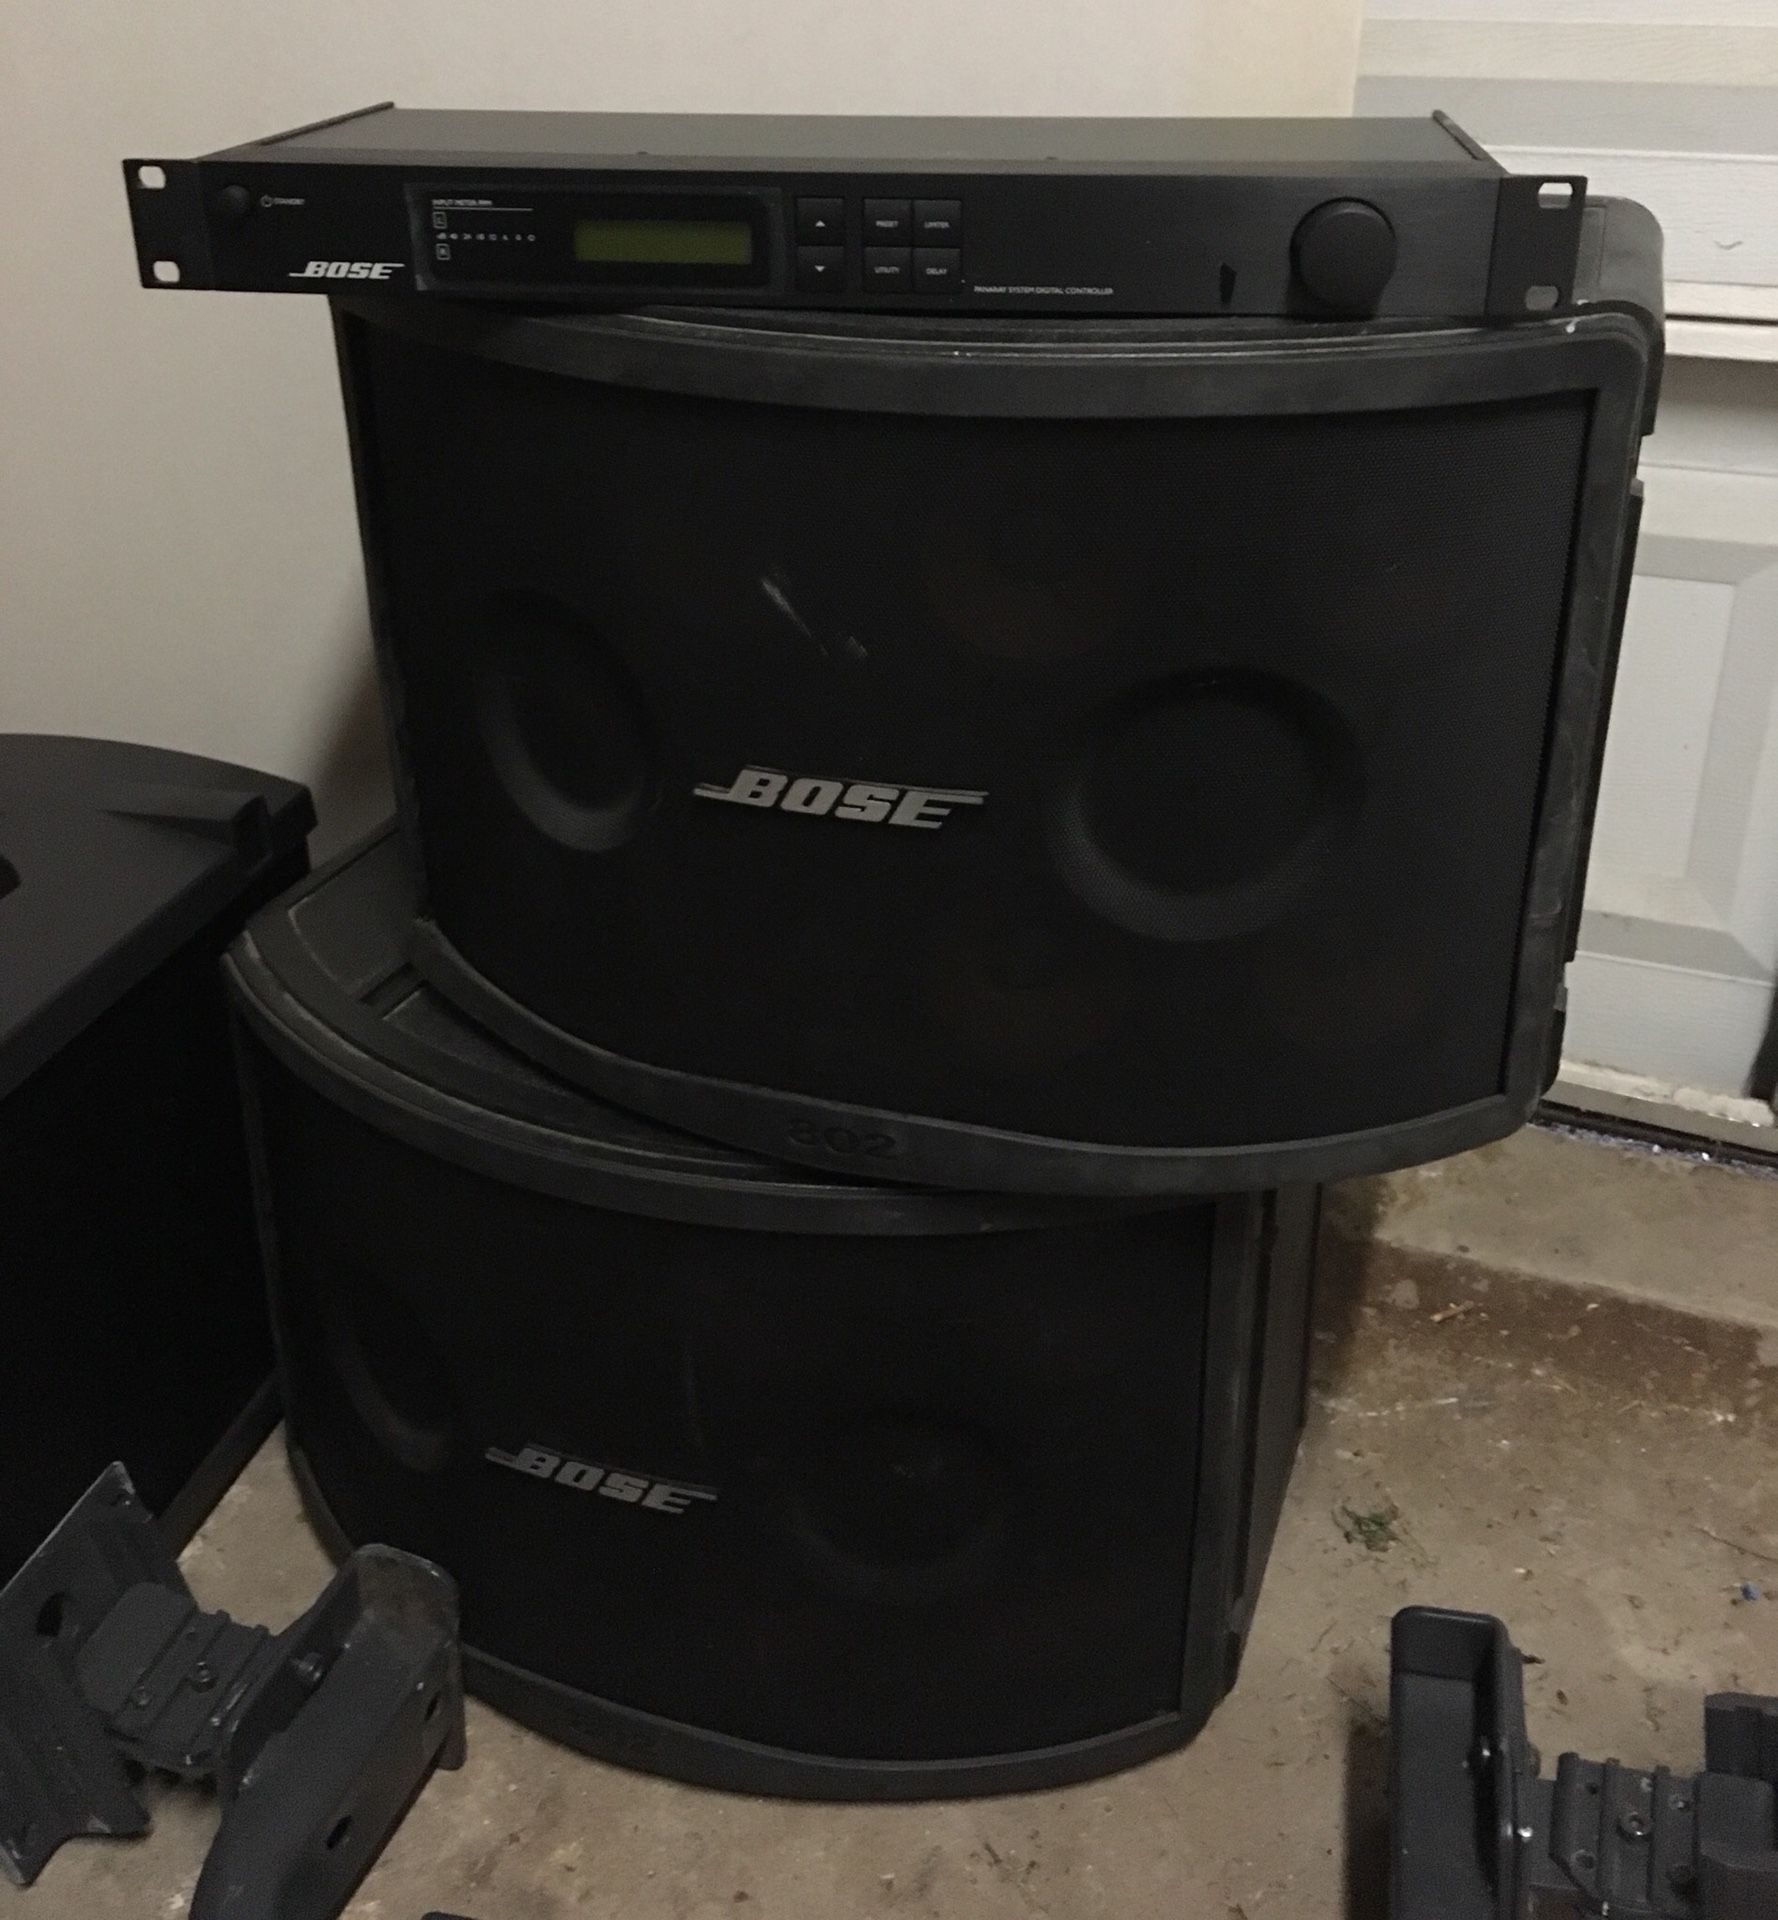 Bose Speakers, Subwoofer and Processor